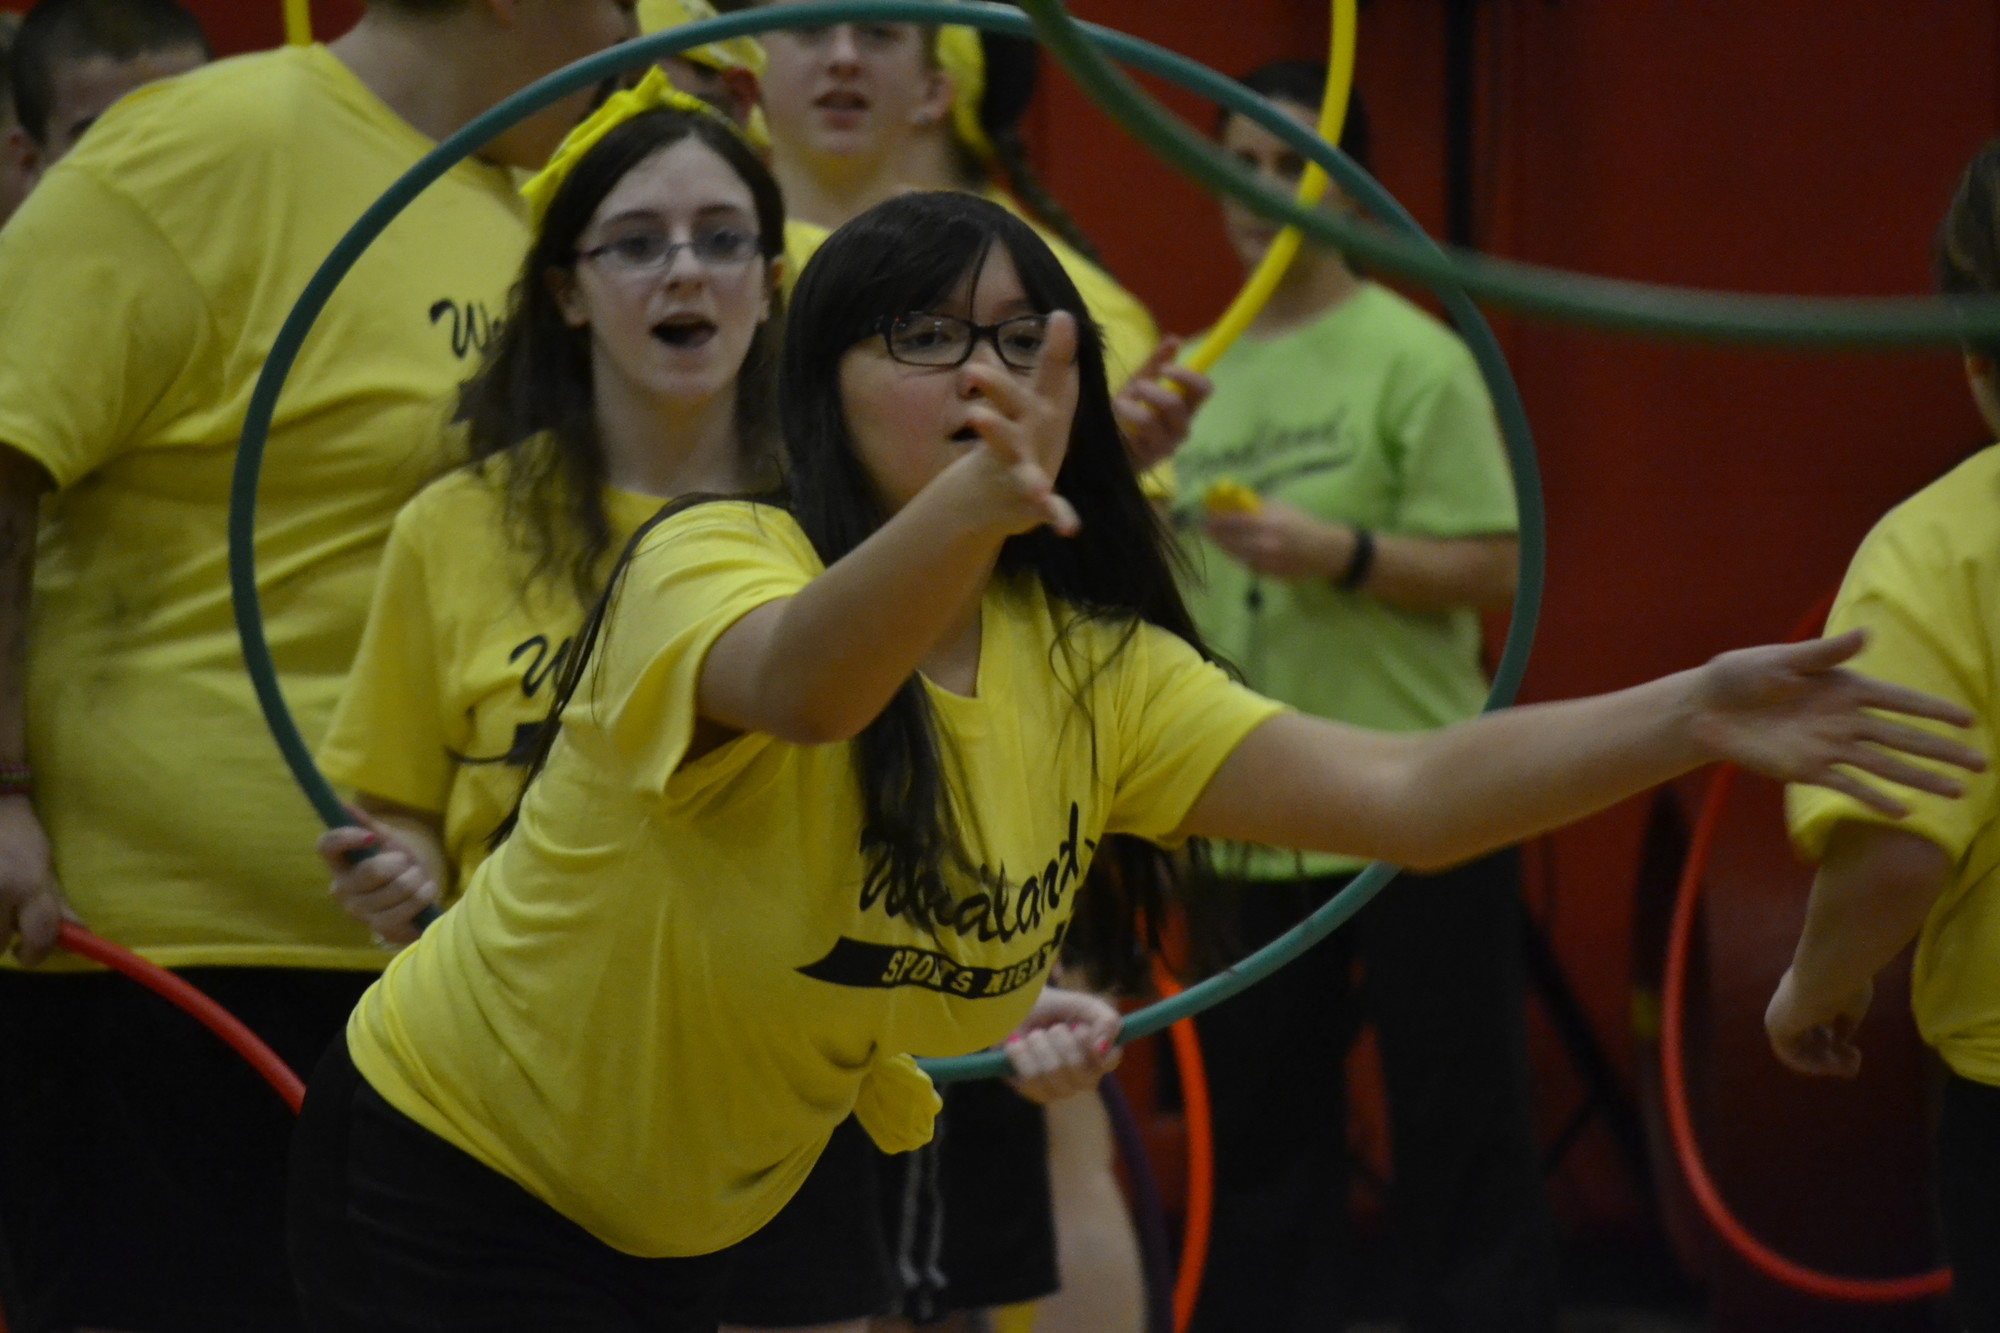 Students from the yellow team threw hula hoops.